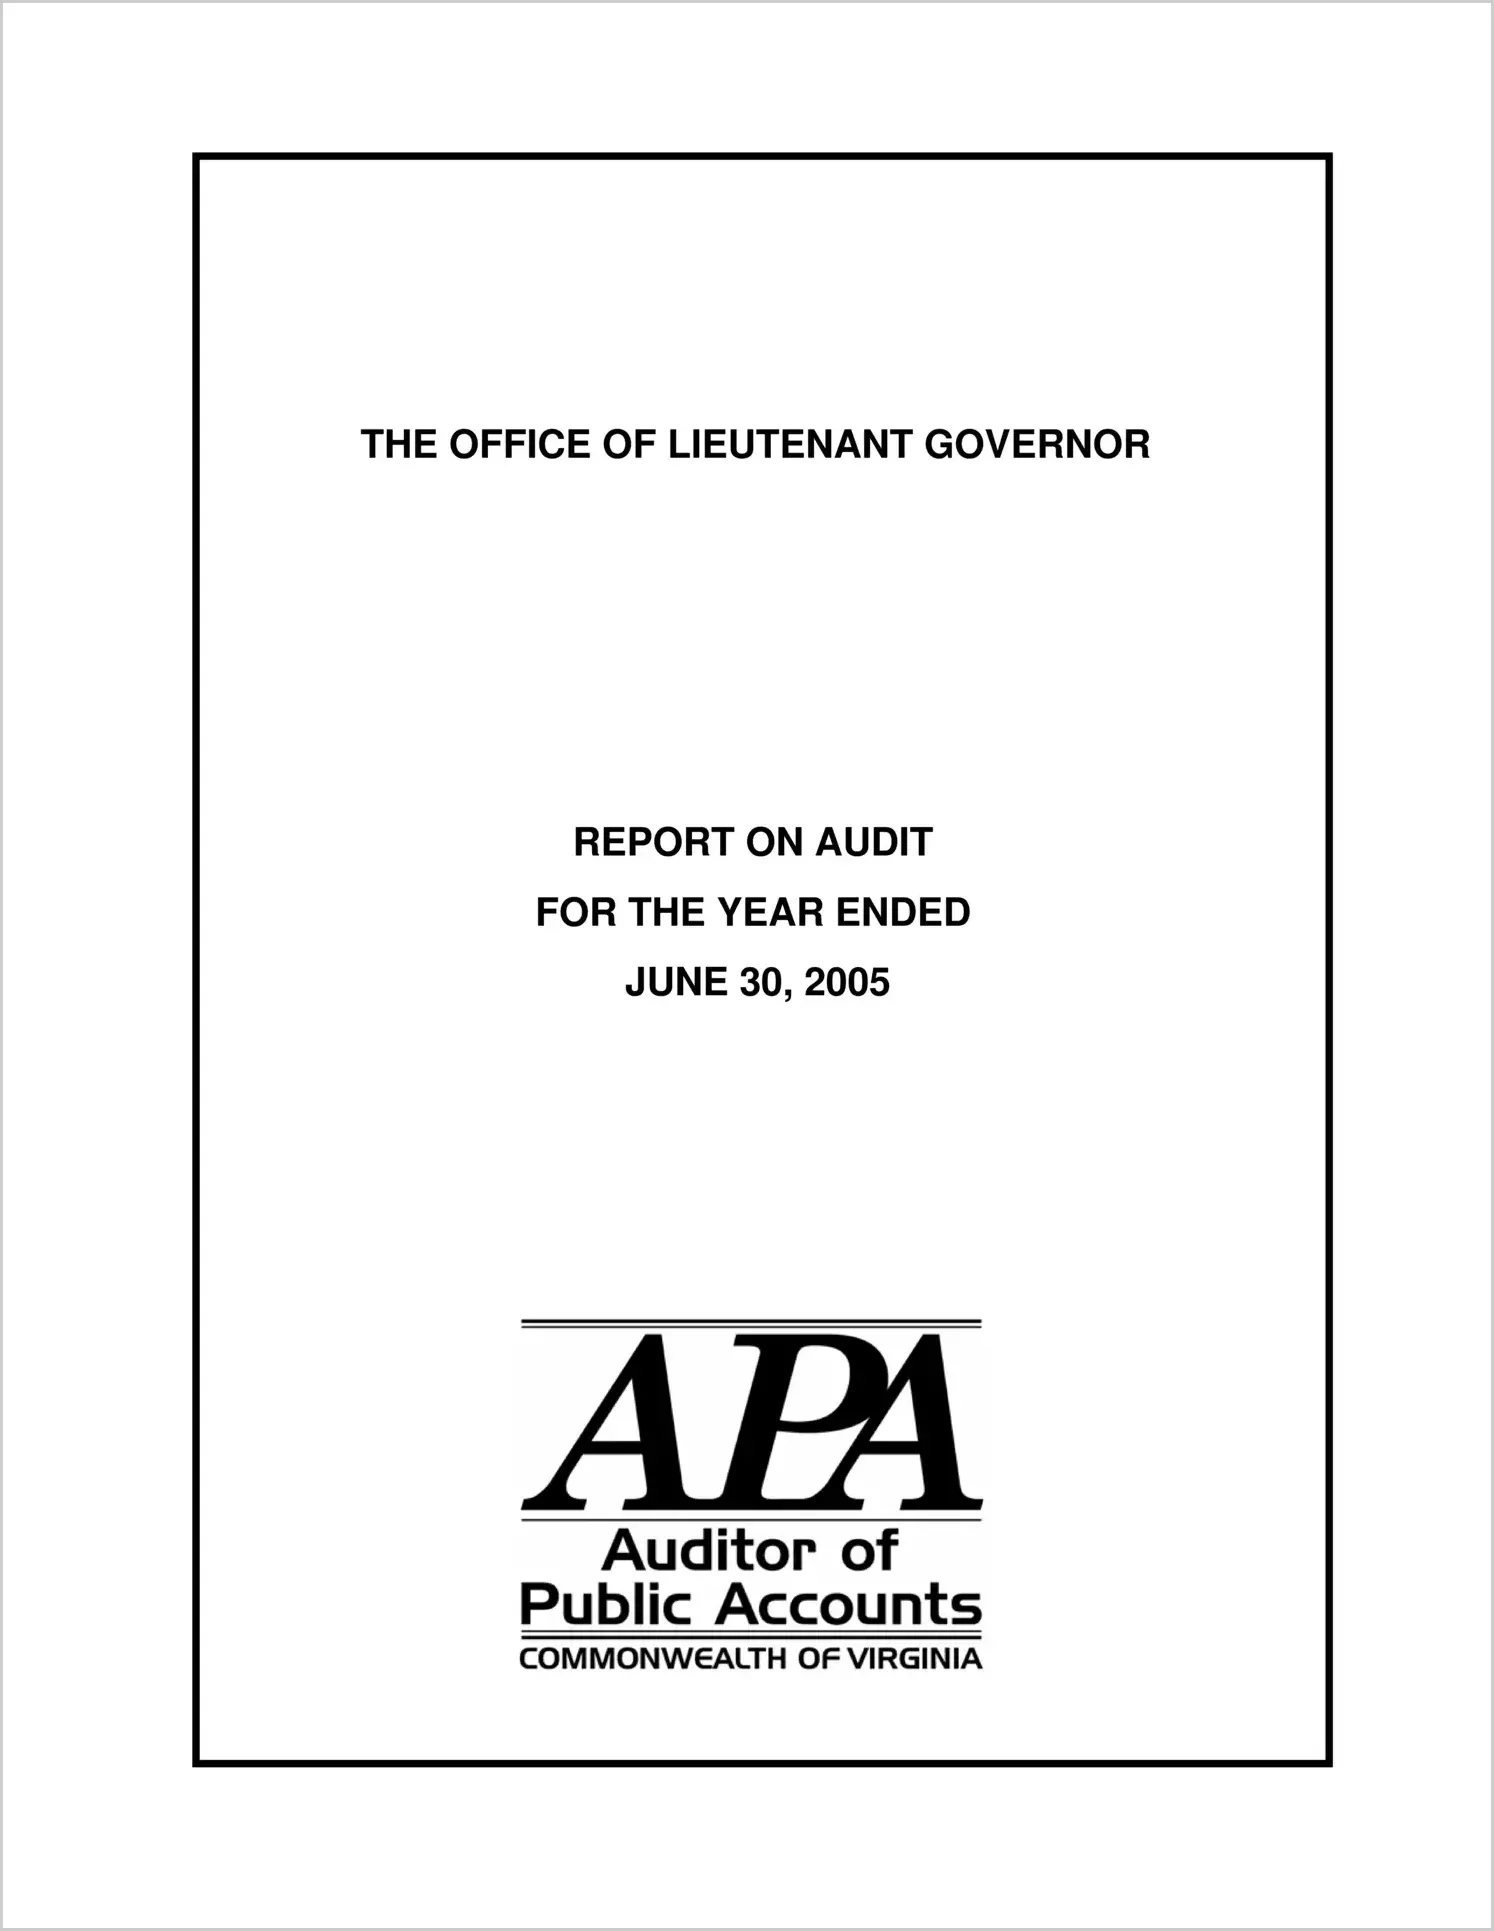 The Office of Lieutenant Governor for the year ended June 30, 2005